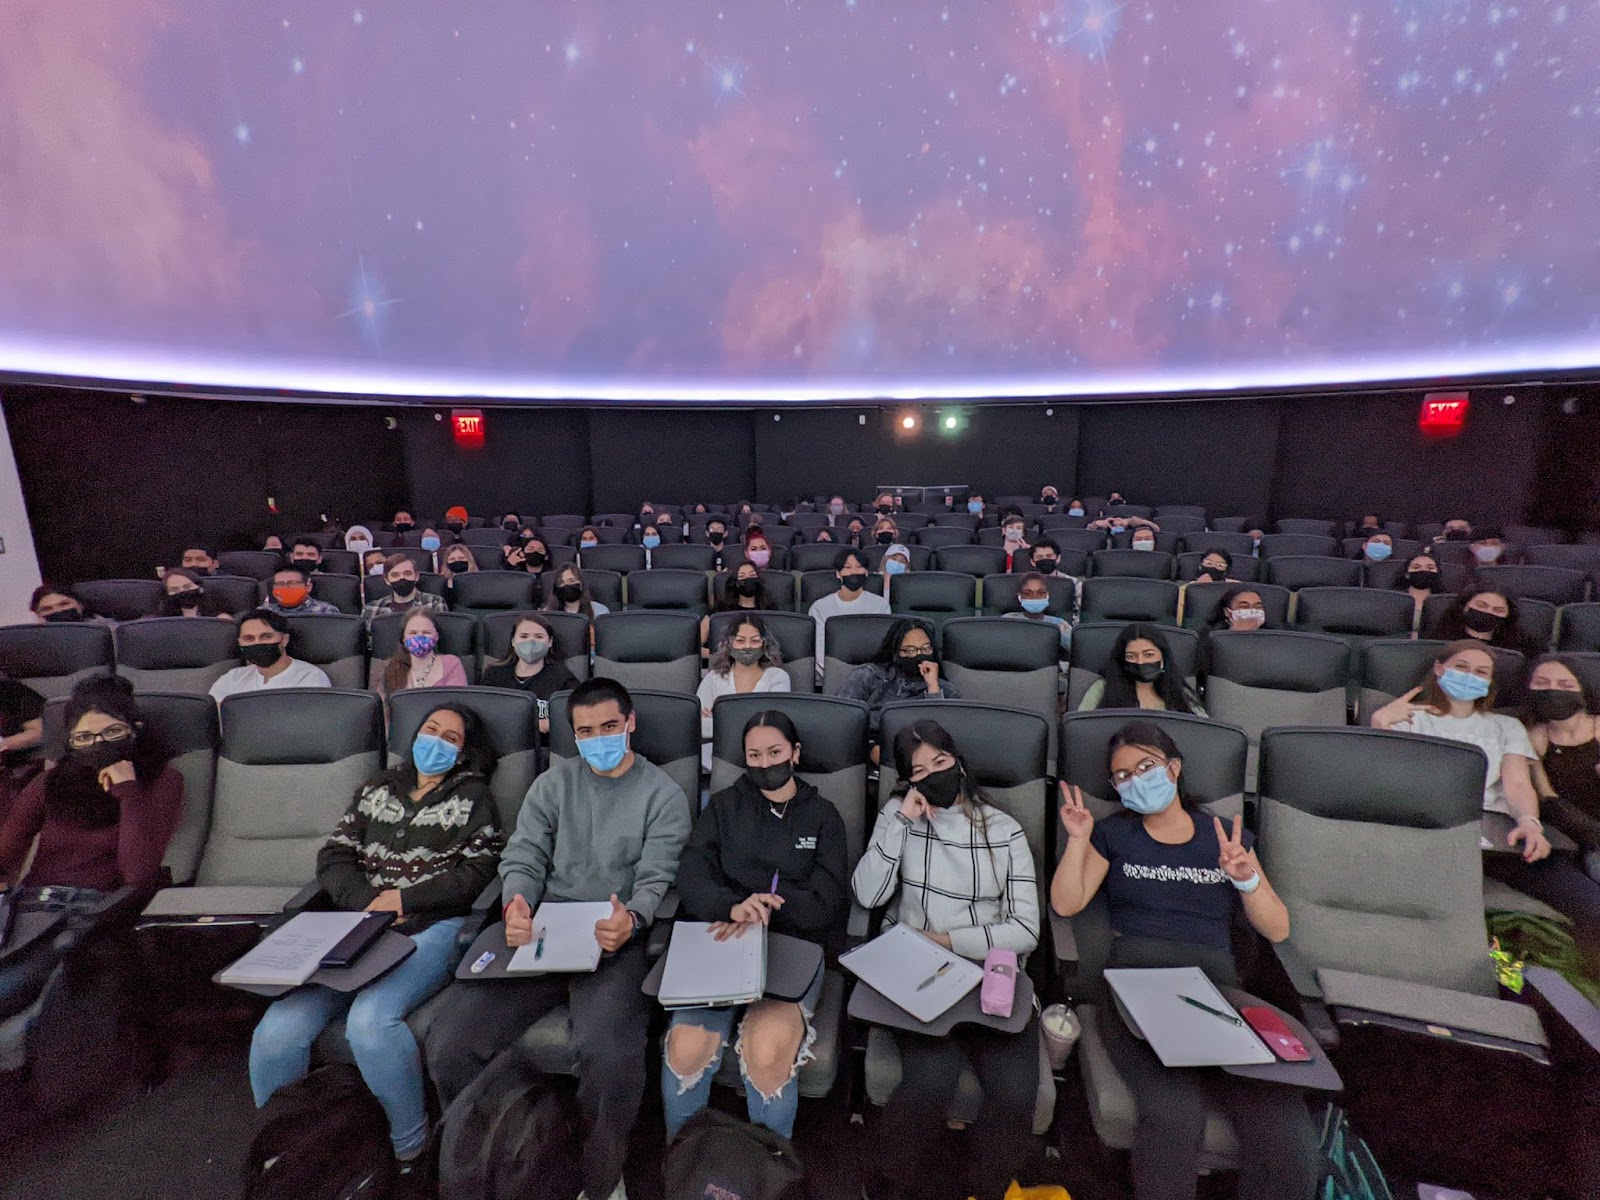 Photograph of the Sac State planetarium, with around two-thirds of the seats occupied by excited students wearing masks and taking notes. They are sitting under the planetarium dome which looks to be projecting an image of a nebula or something similar.